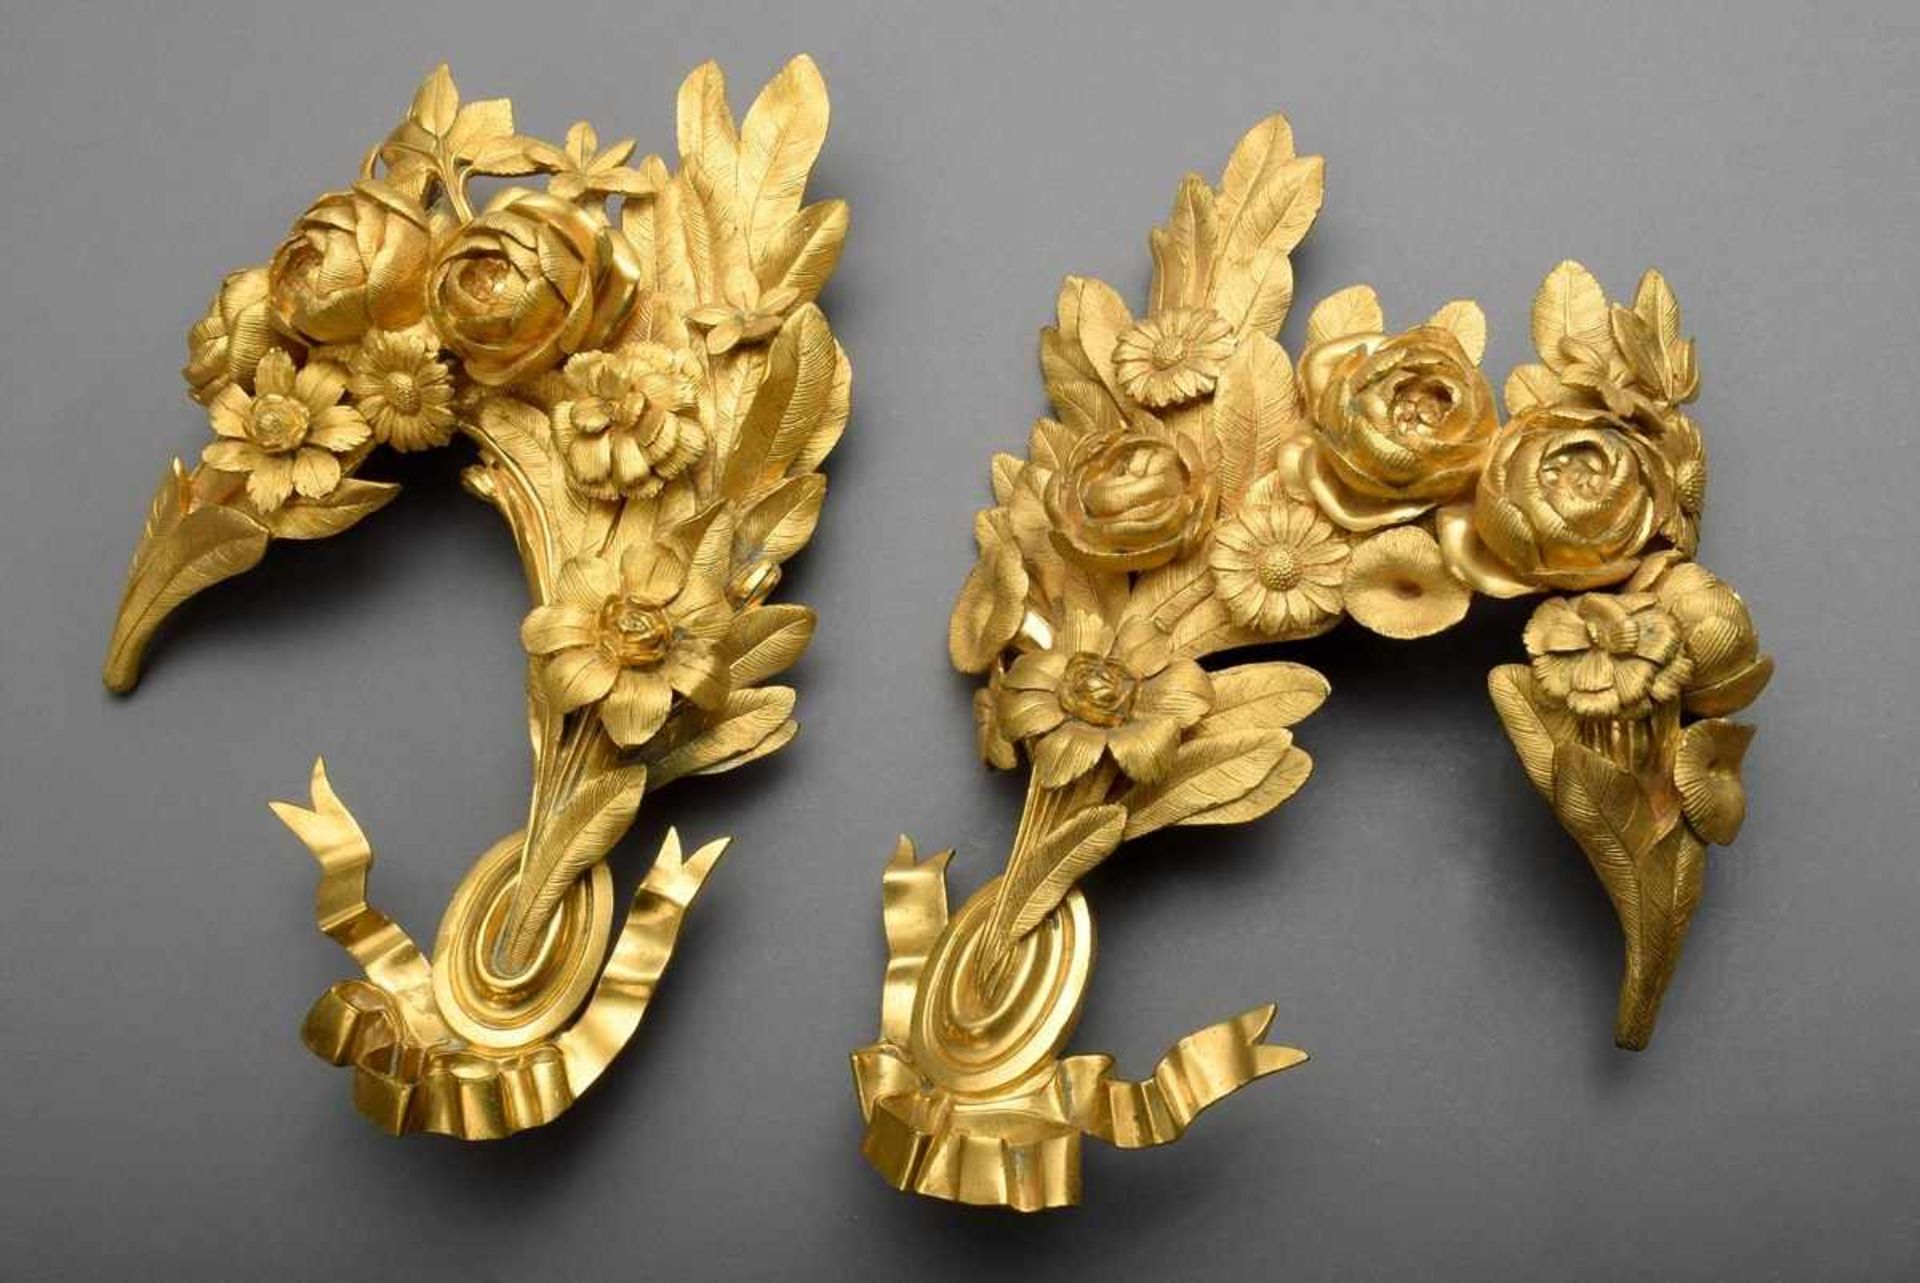 Pair of large, fire-gilt bronze wall decorations "Flower garlands and laurel branches with ribbons",